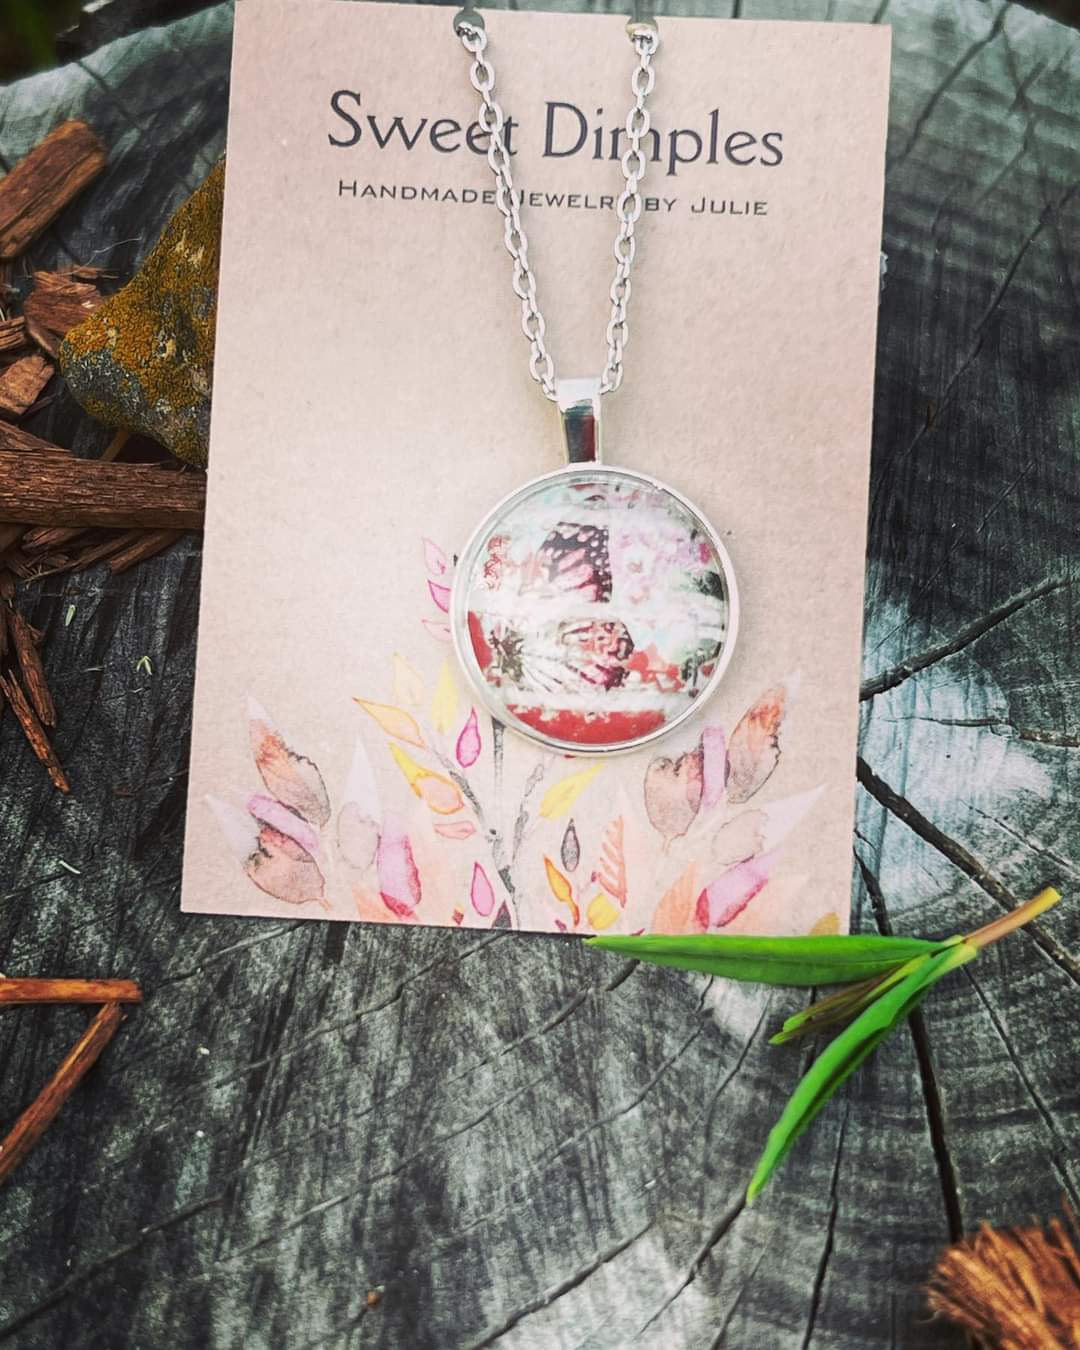 Sweet dimples necklaces